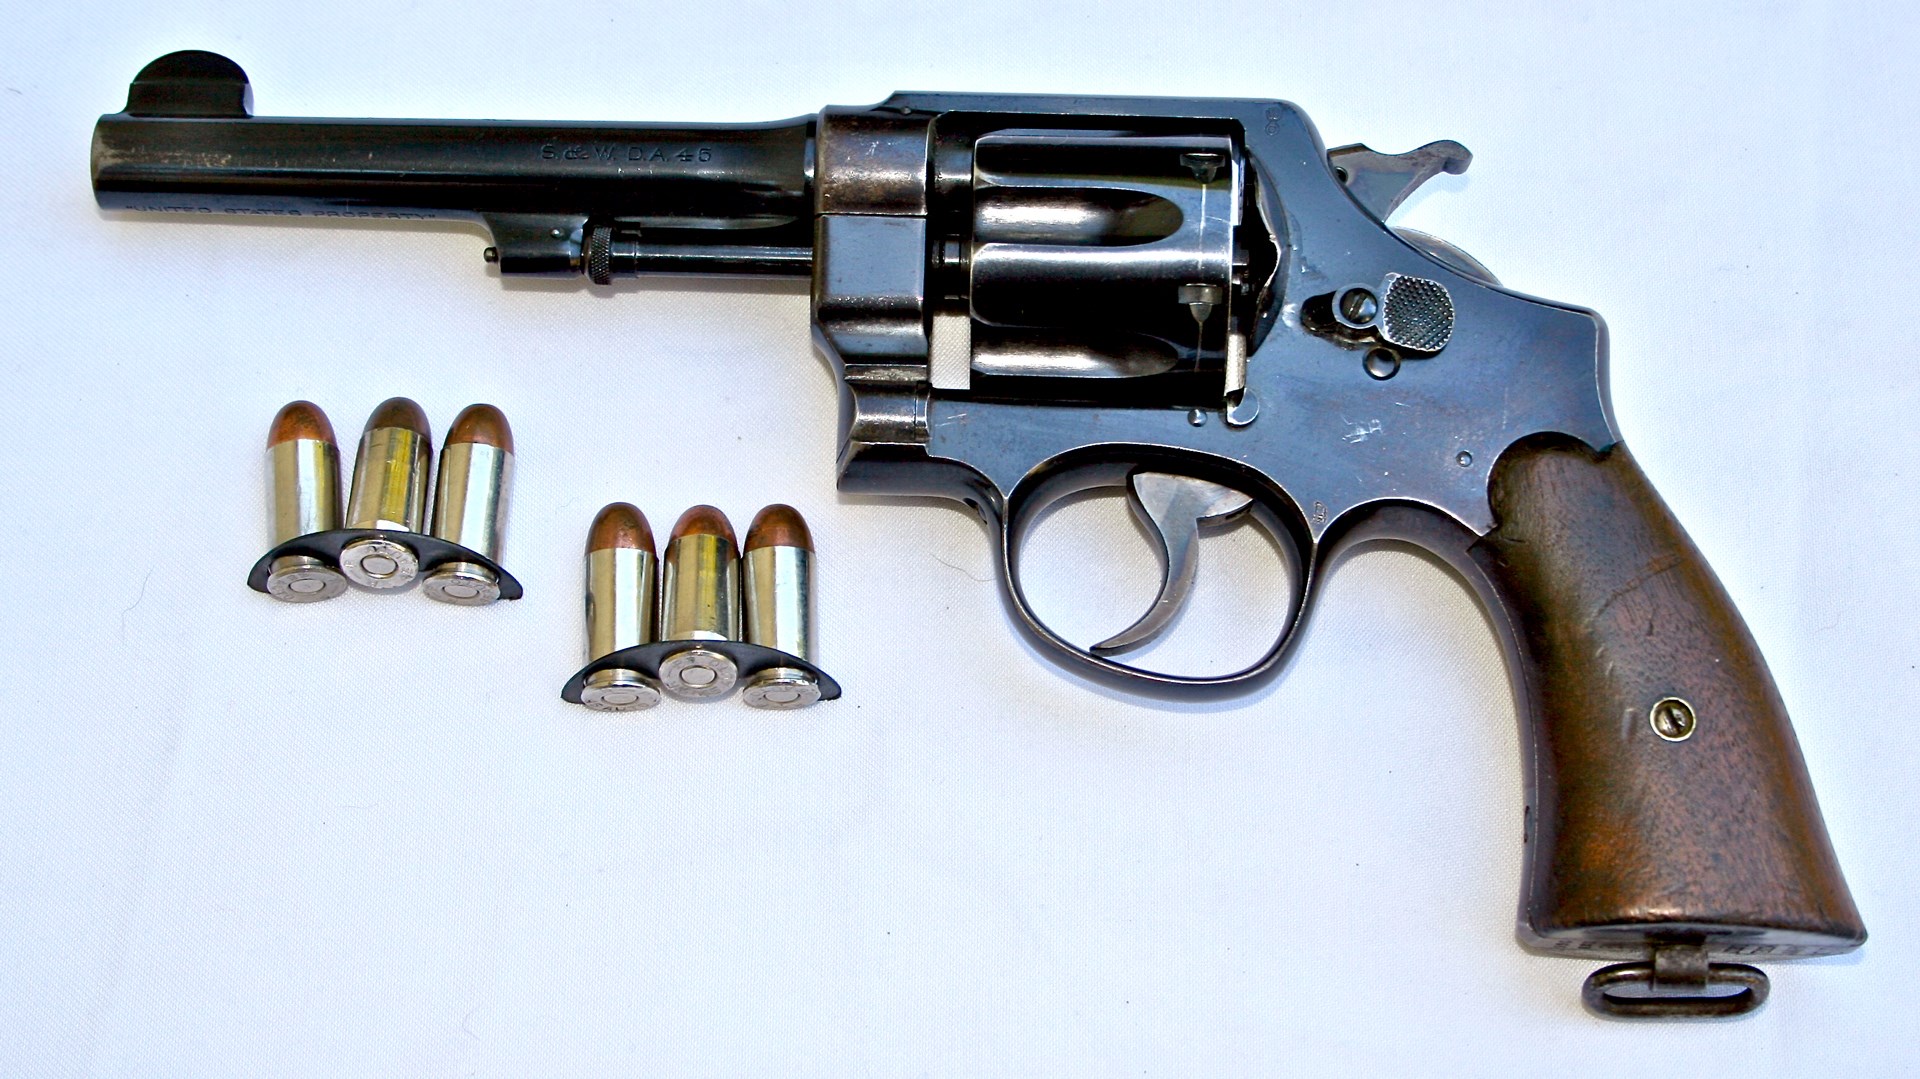 The S&W Second Model Hand Ejector was called into service during the Second World War and, along with the Colt New Service, became the Model 1917. Both guns were chambered for .45 ACP, which required the use of half-moon clips in order to use their extractors.